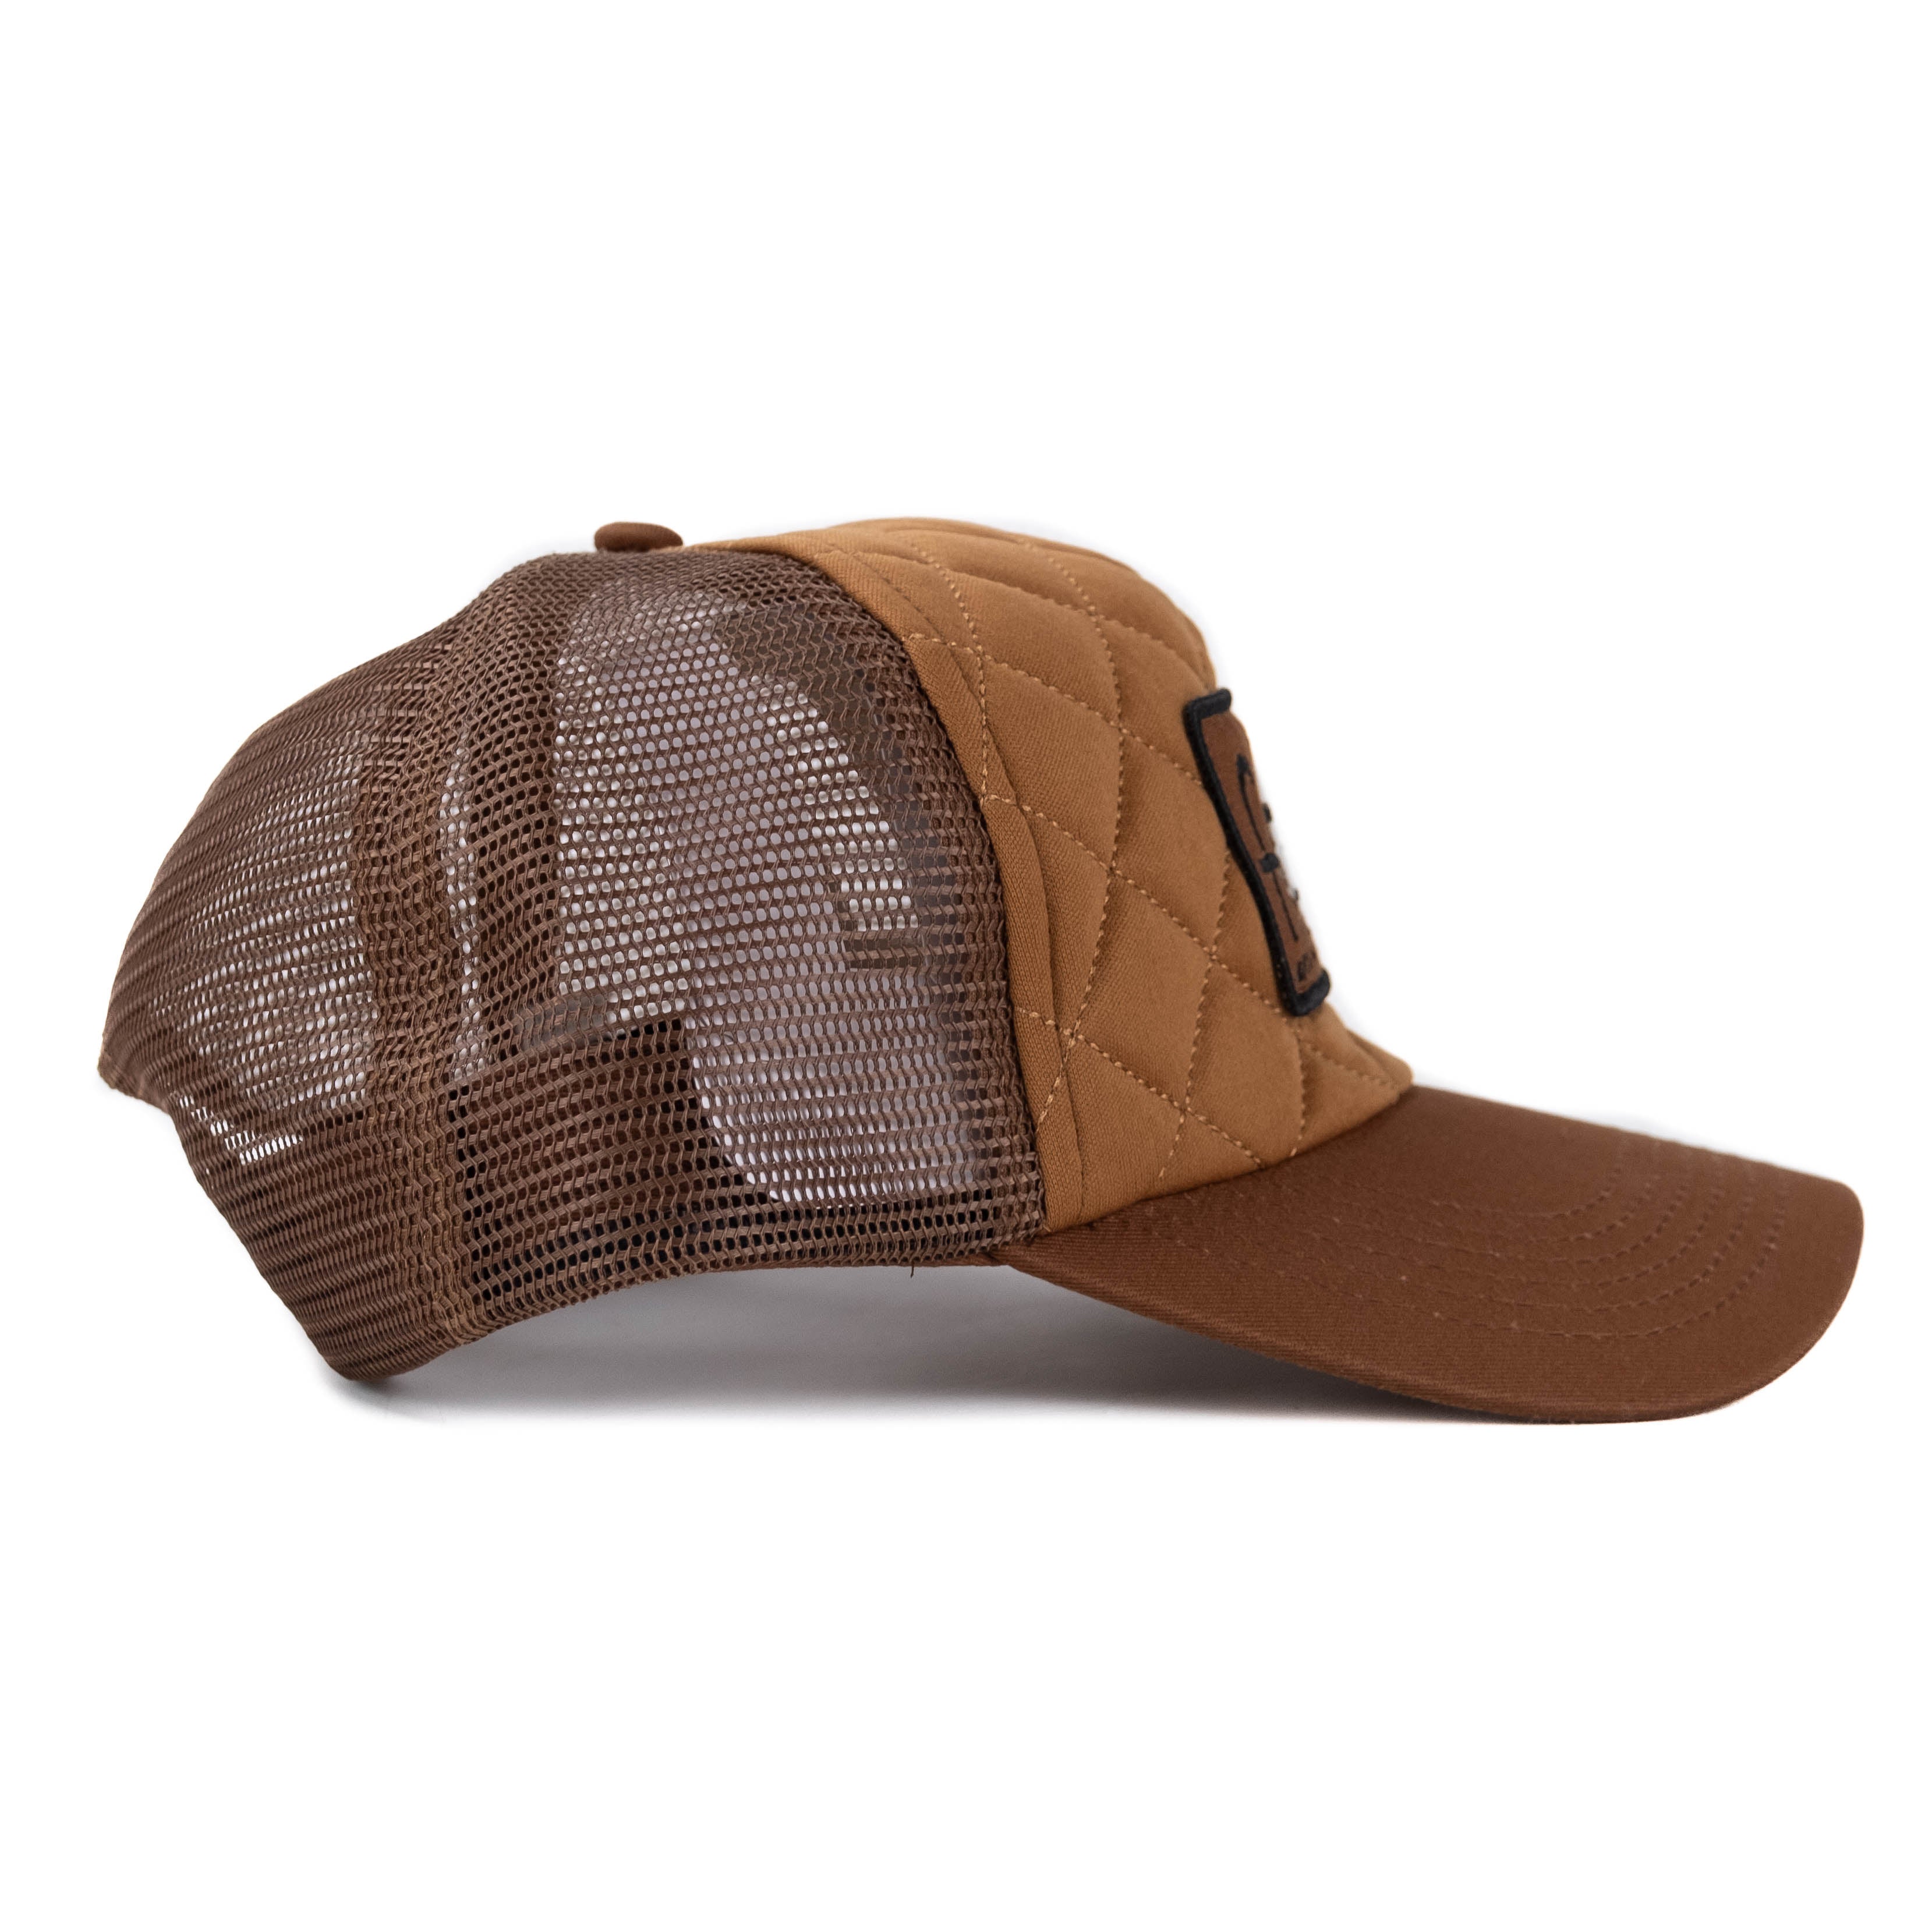 Home Sweet Egg Hat-Brown